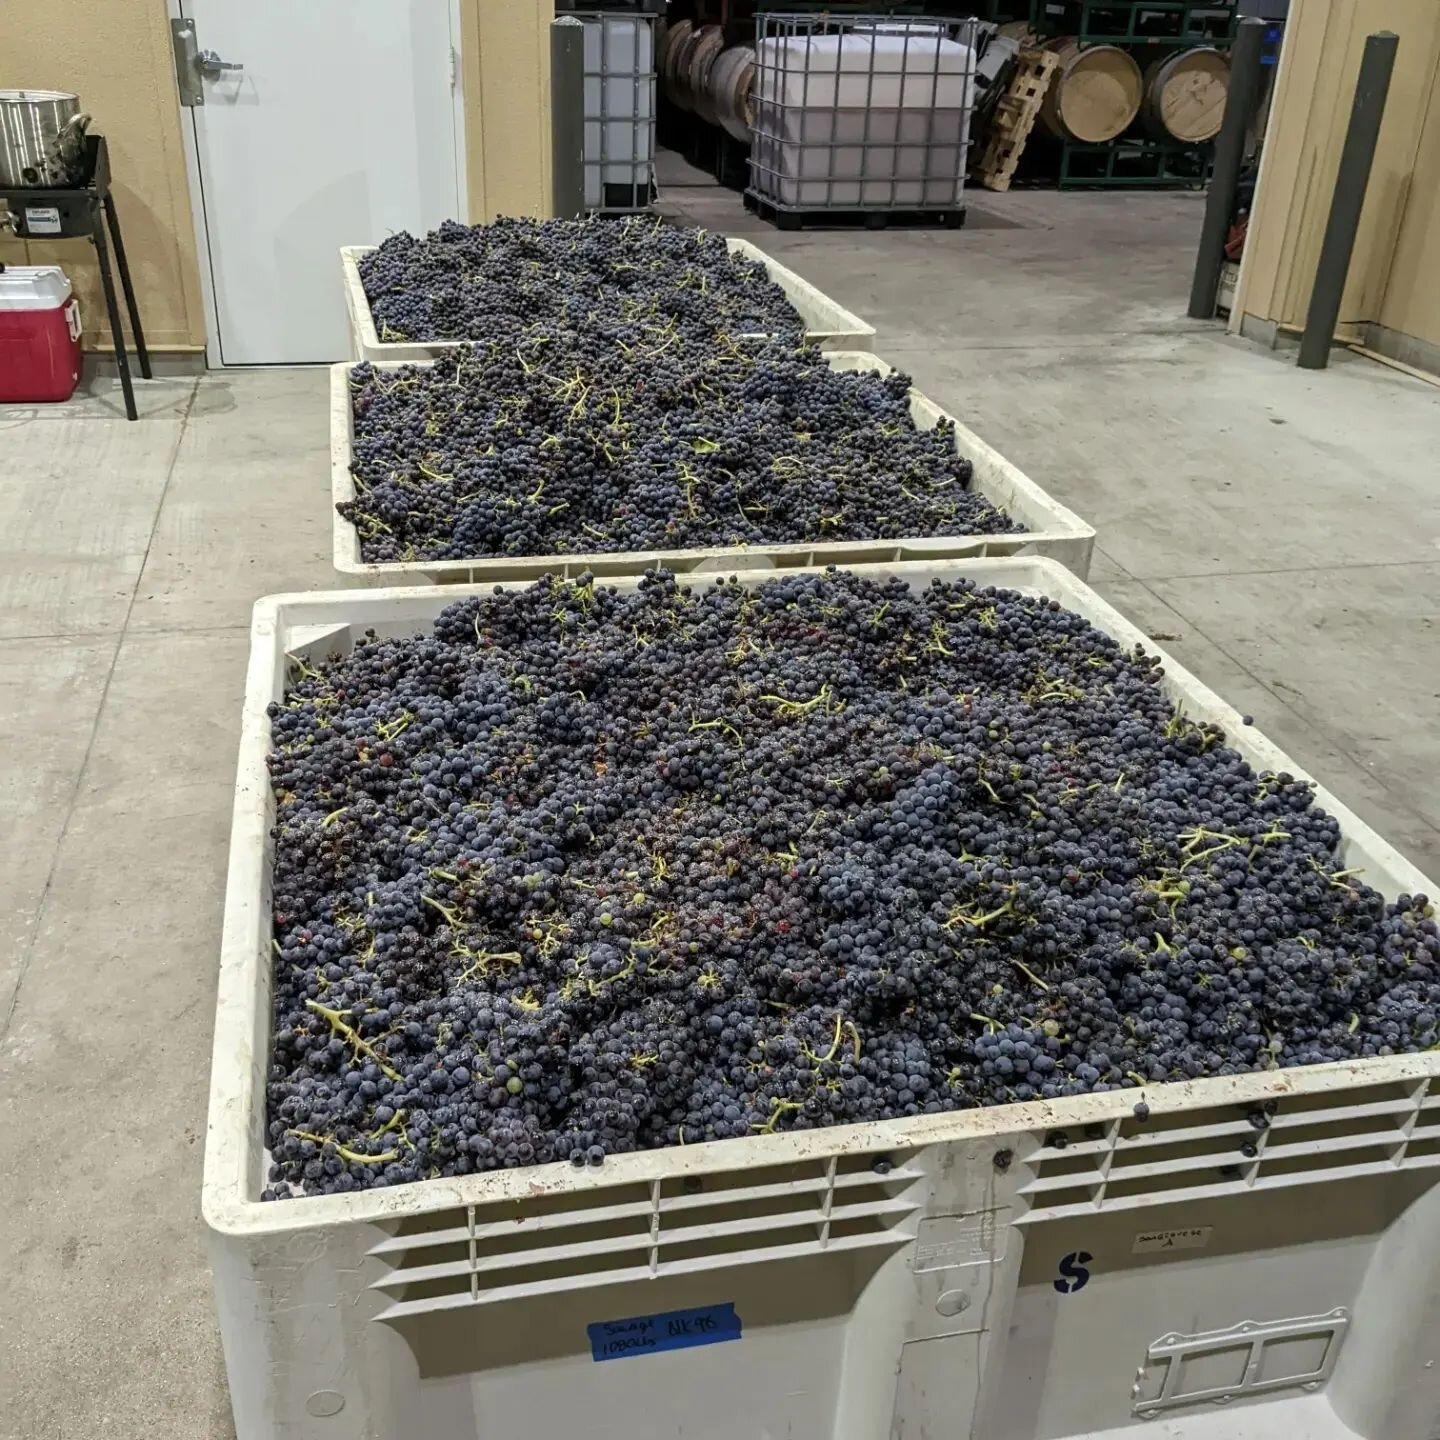 And we're off! Today's 4AM grape pick is brought to you by gorgeous Paso Robles Grenache from atop the sea-breeze-kissed hills of the Adelaida District AVA. And Starbucks! ⚡

3 weeks earlier than usual but the ripeness is there and these grapes would